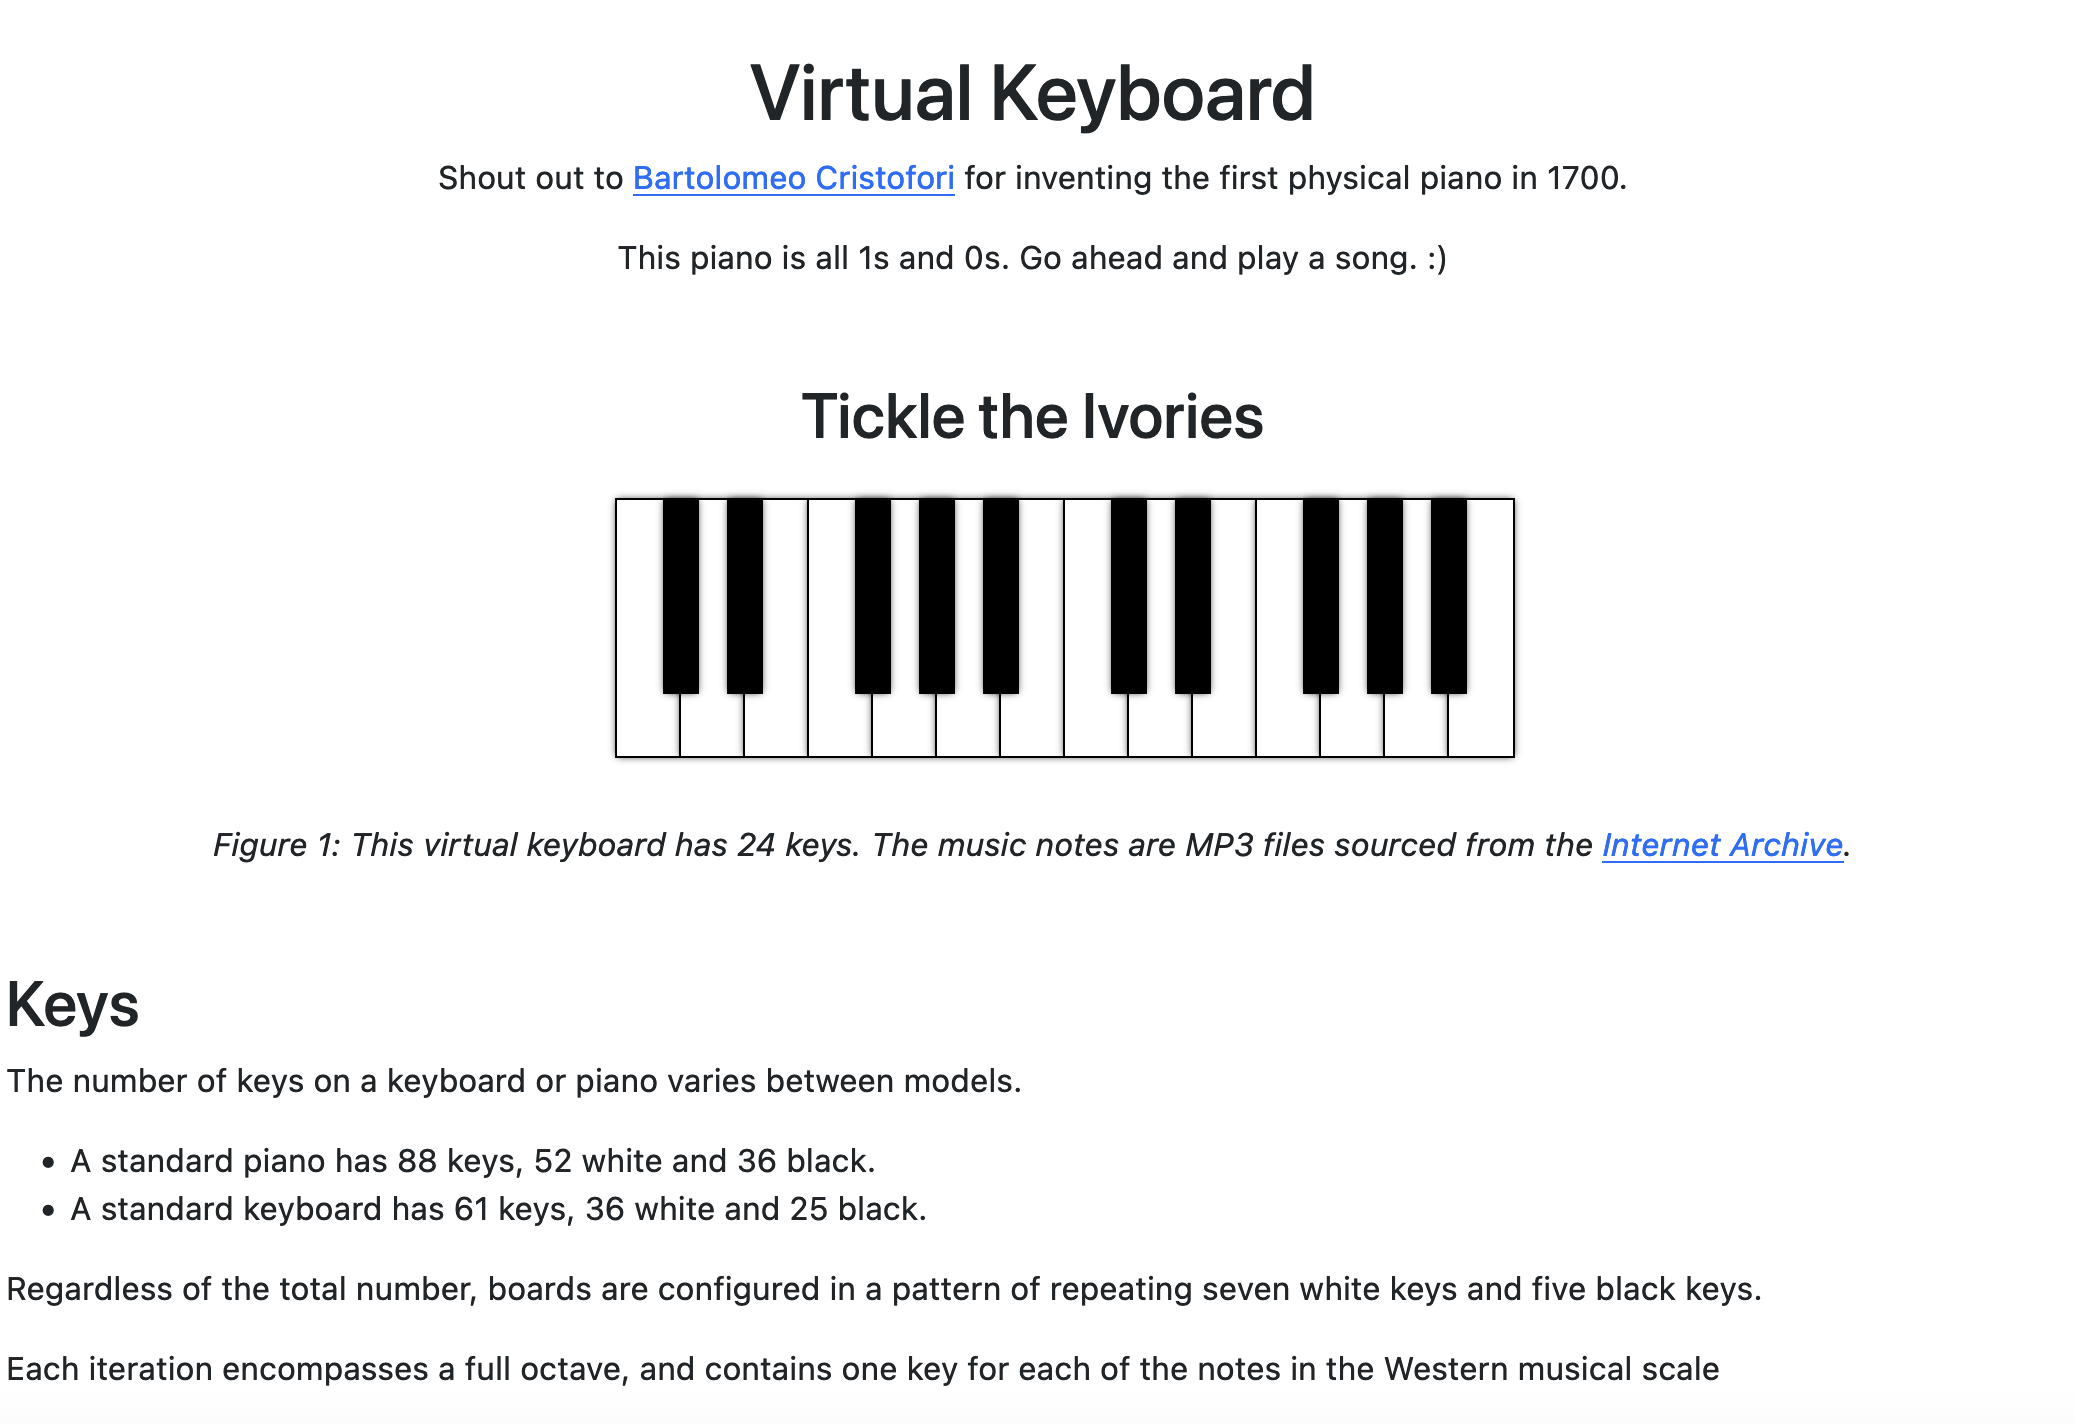 A screenshot of the "iVory" virtual piano project featuring an interactive on-screen piano keyboard